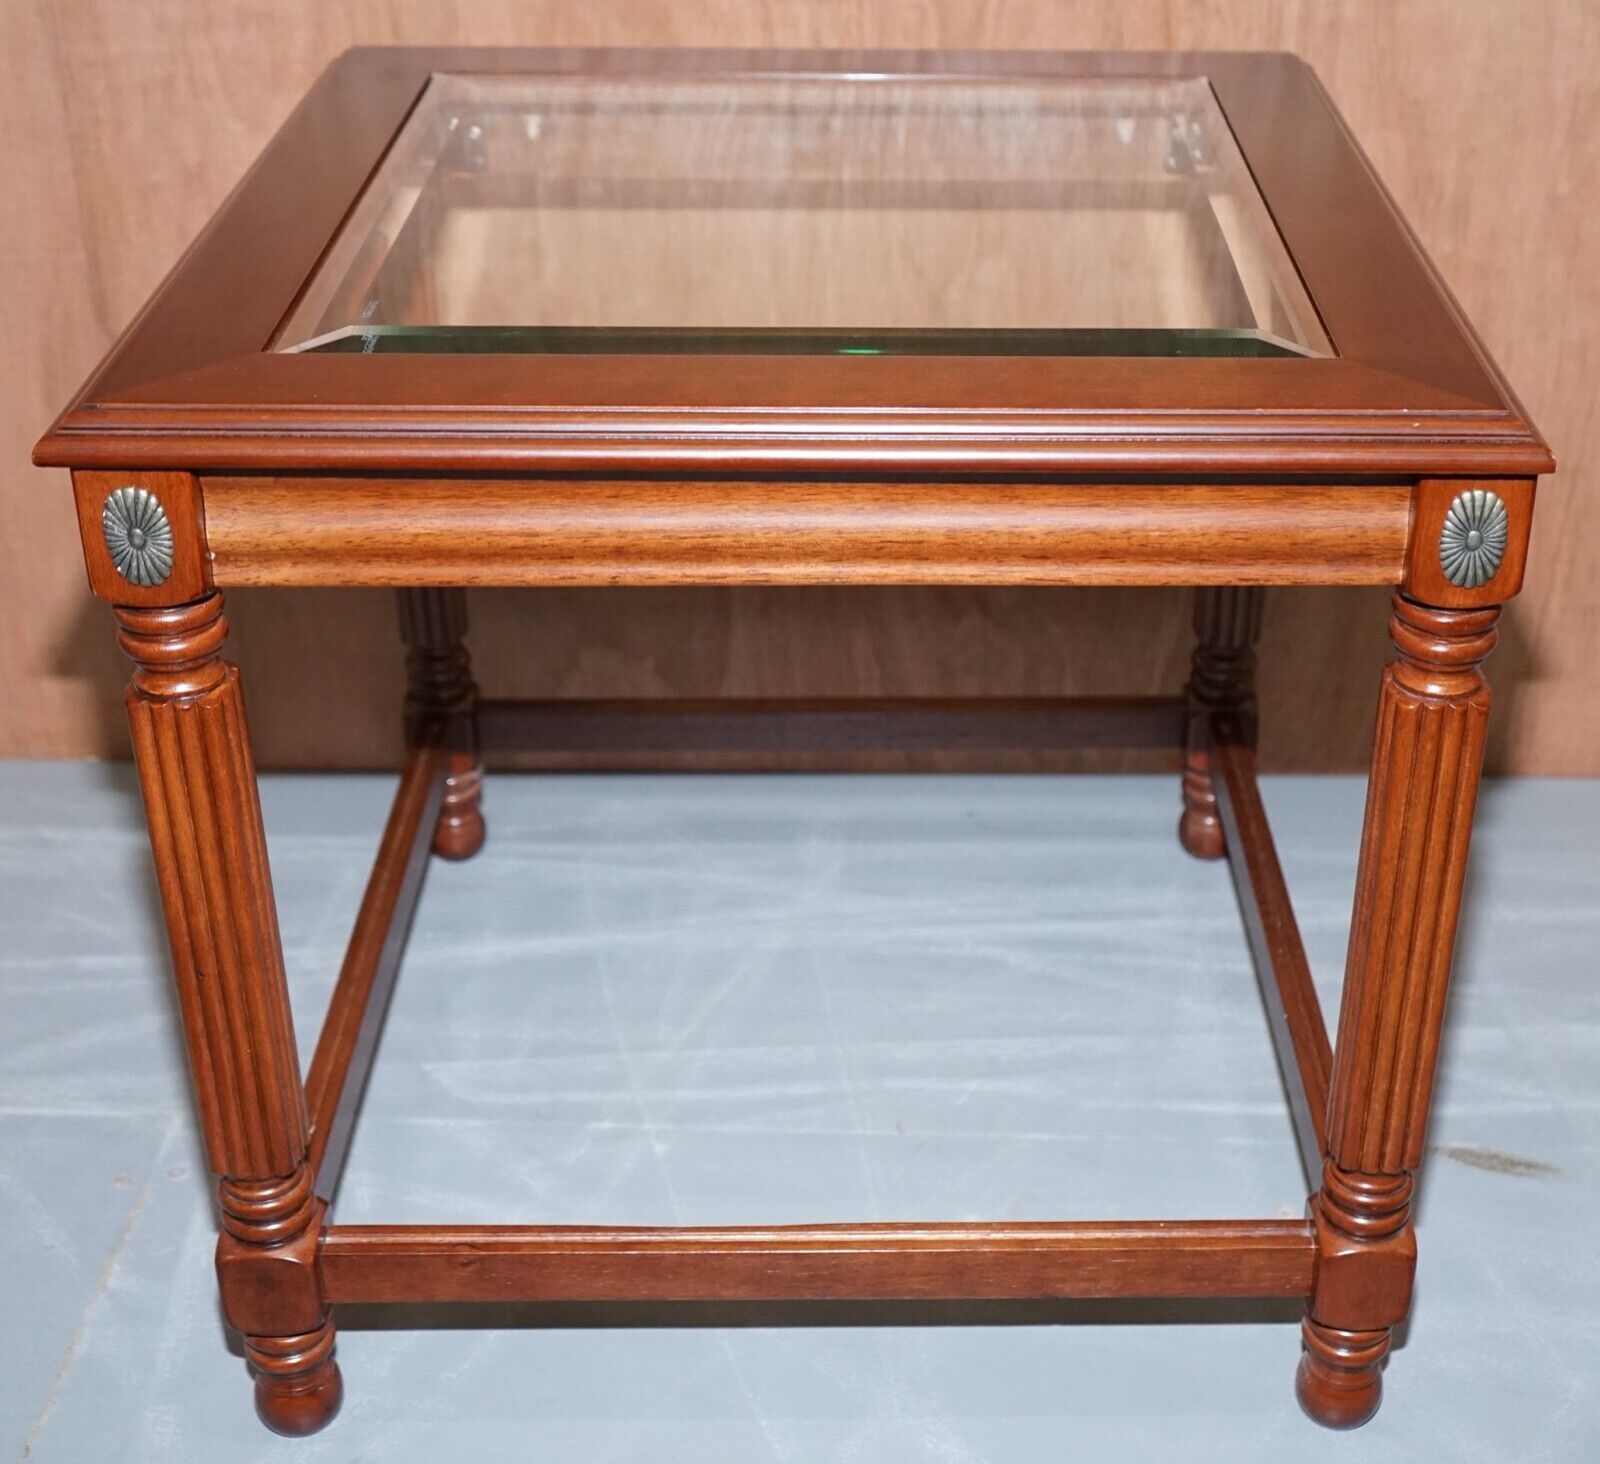 PAIR OF BEAUTIFUL WOODEN SIDE TABLES WITH GLASS TOP